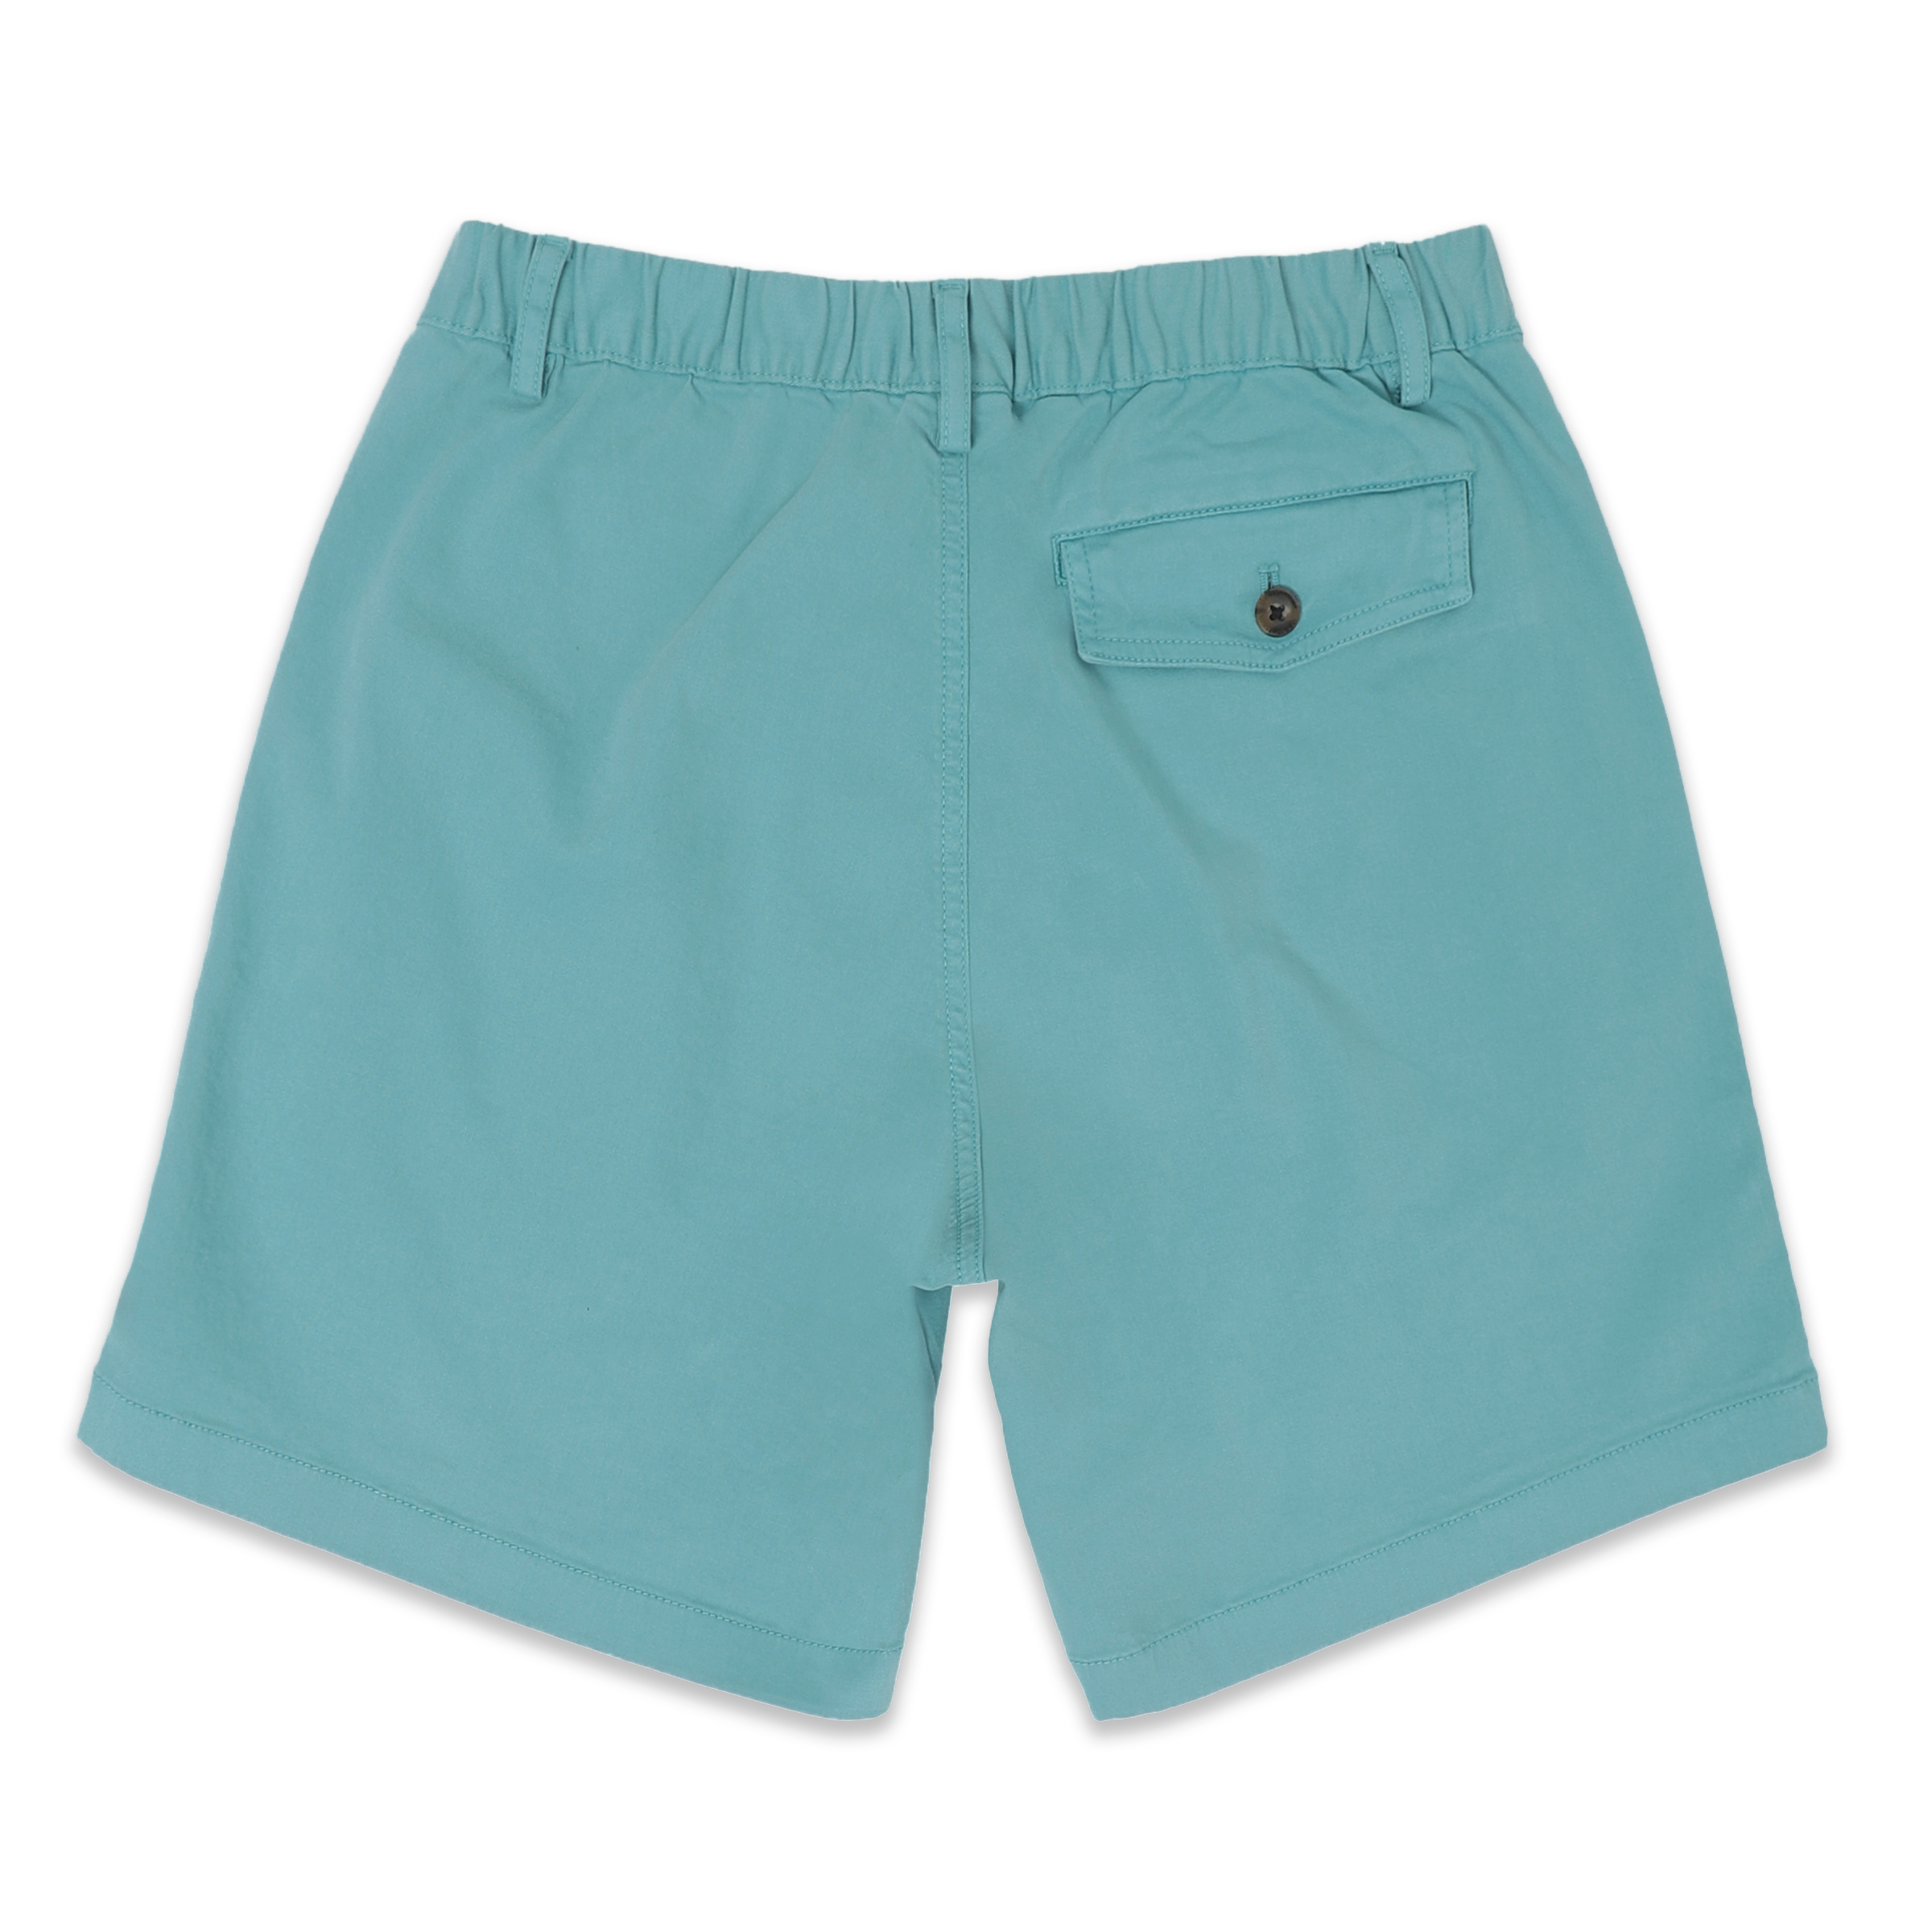 Stretch Short 7" Marine back with elastic waistband, belt loops, and right buttoned back pocket